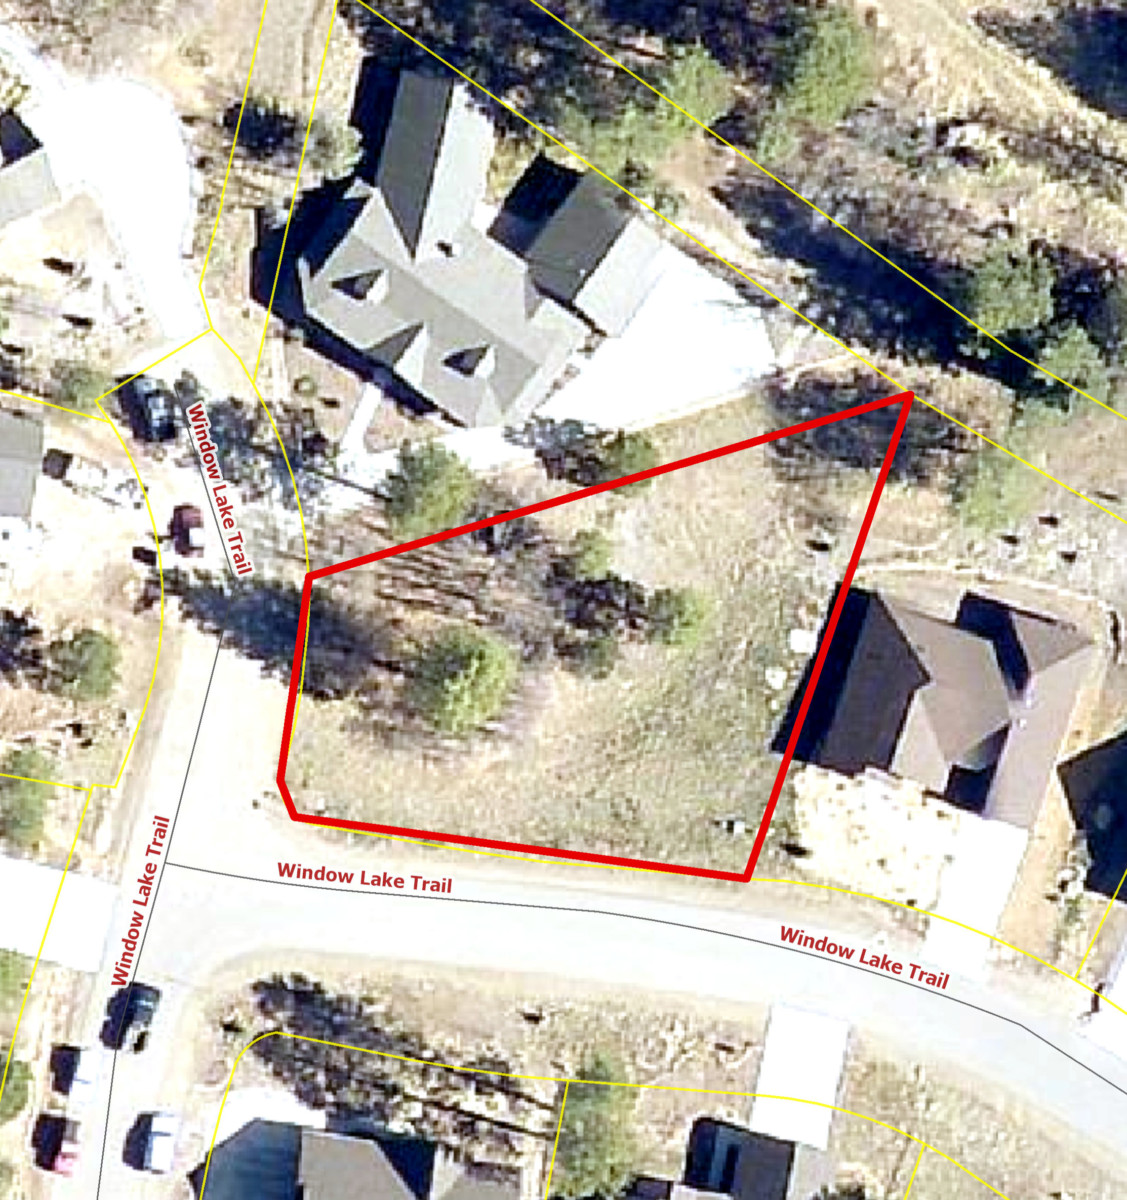 Land for Sale Durango CO - 405 Window Lake Trail GIS for website